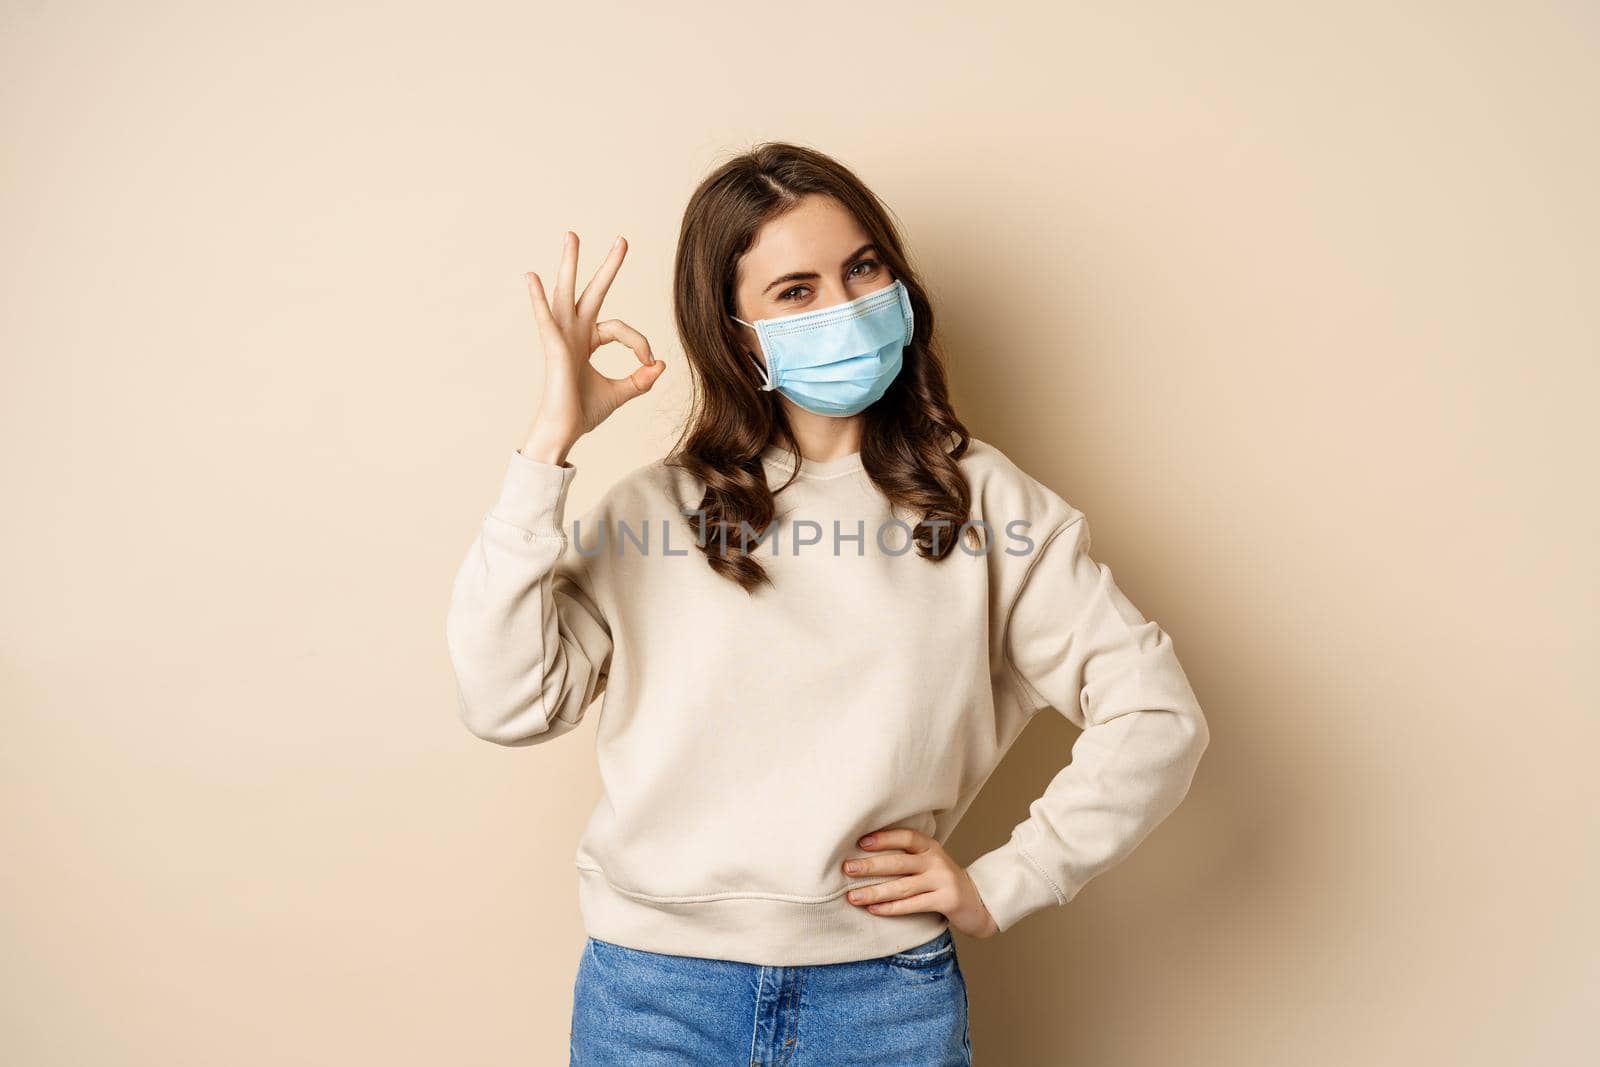 Covid-19, pandemic and quarantine concept. Young woman wears medical face mask during coronavirus omicron outbreak, showing okay sign, standing over beige background.